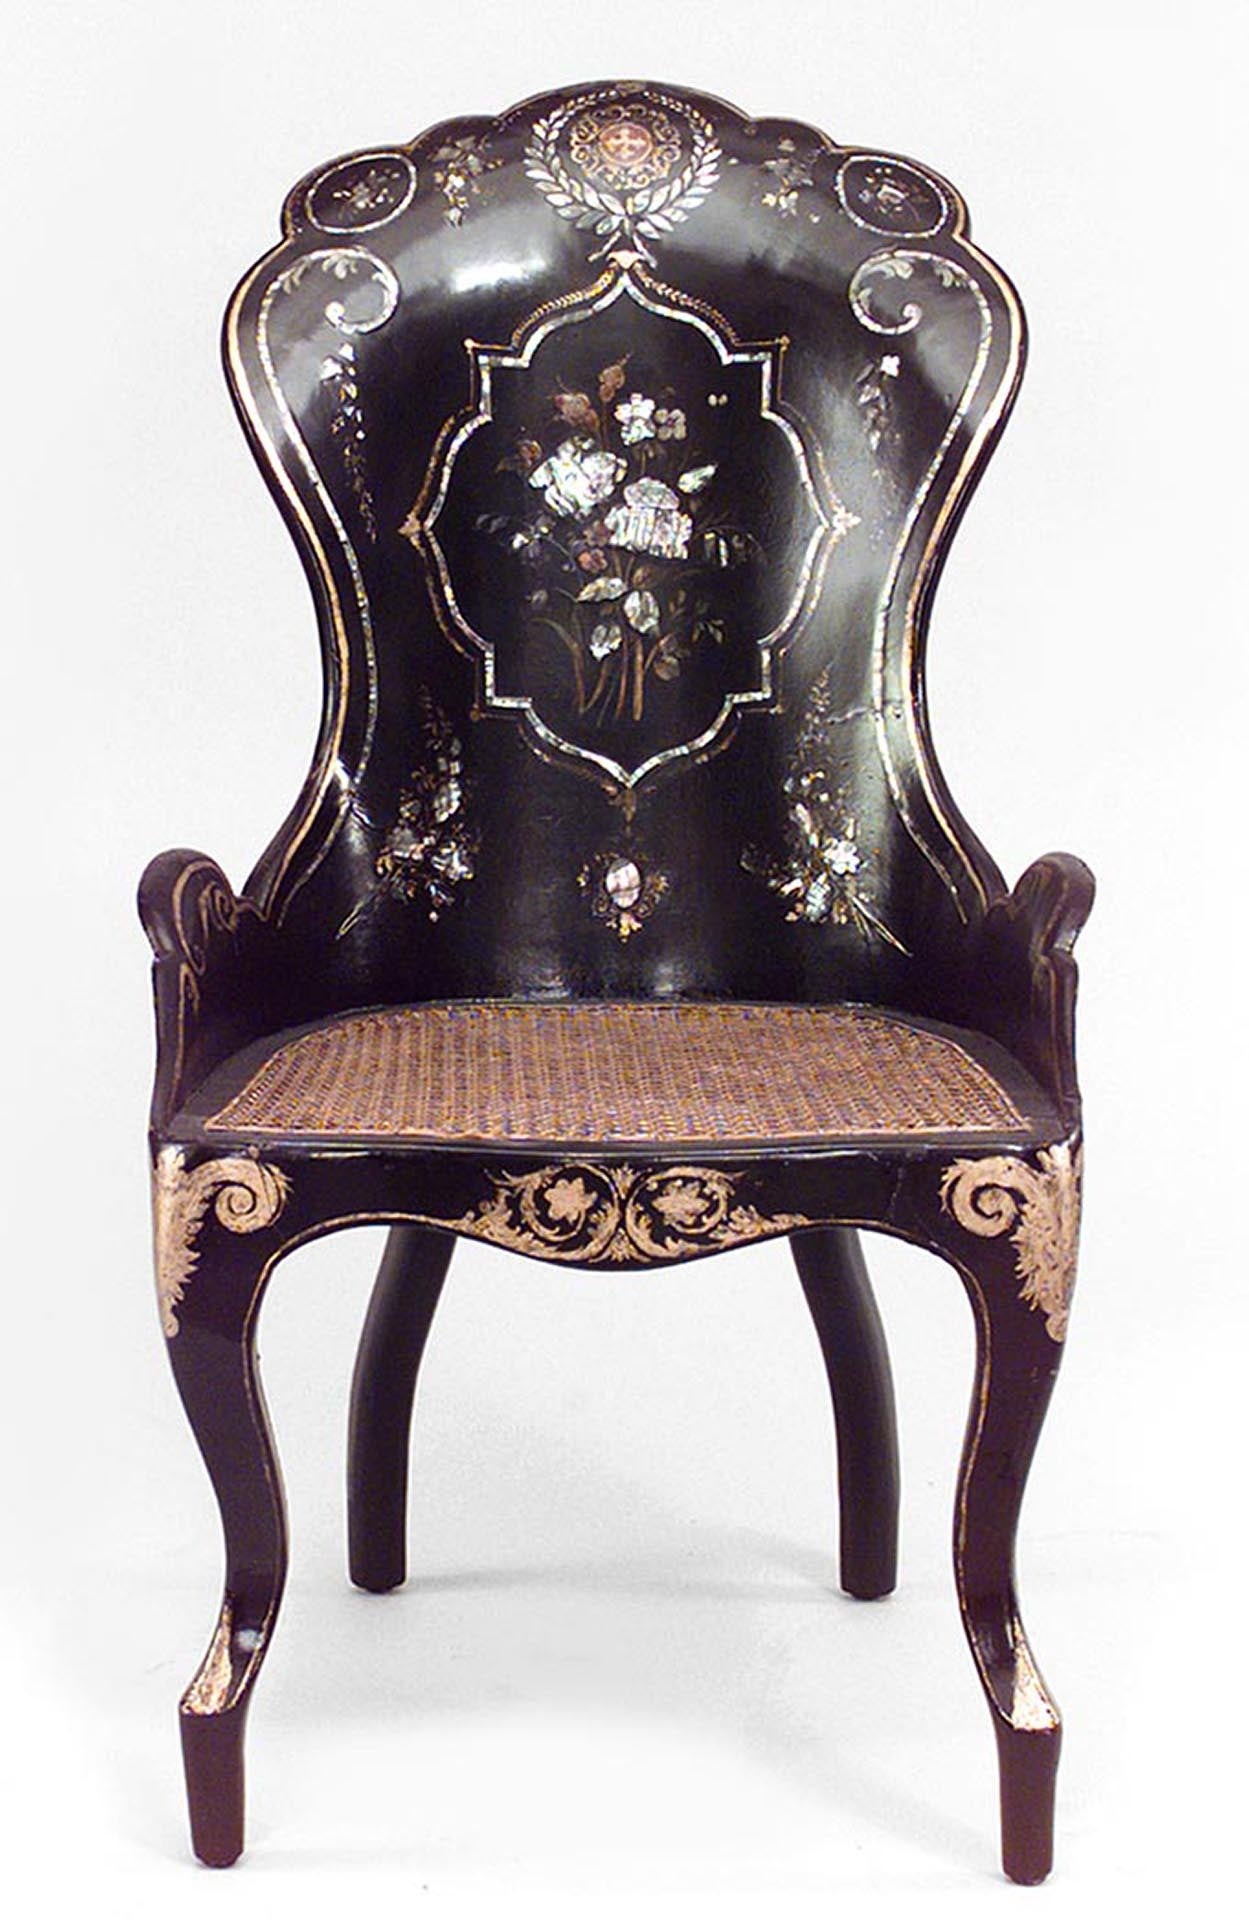 19th Century 19th c. English Papier Mache Pearl-Inlaid Lacquered Side Chair